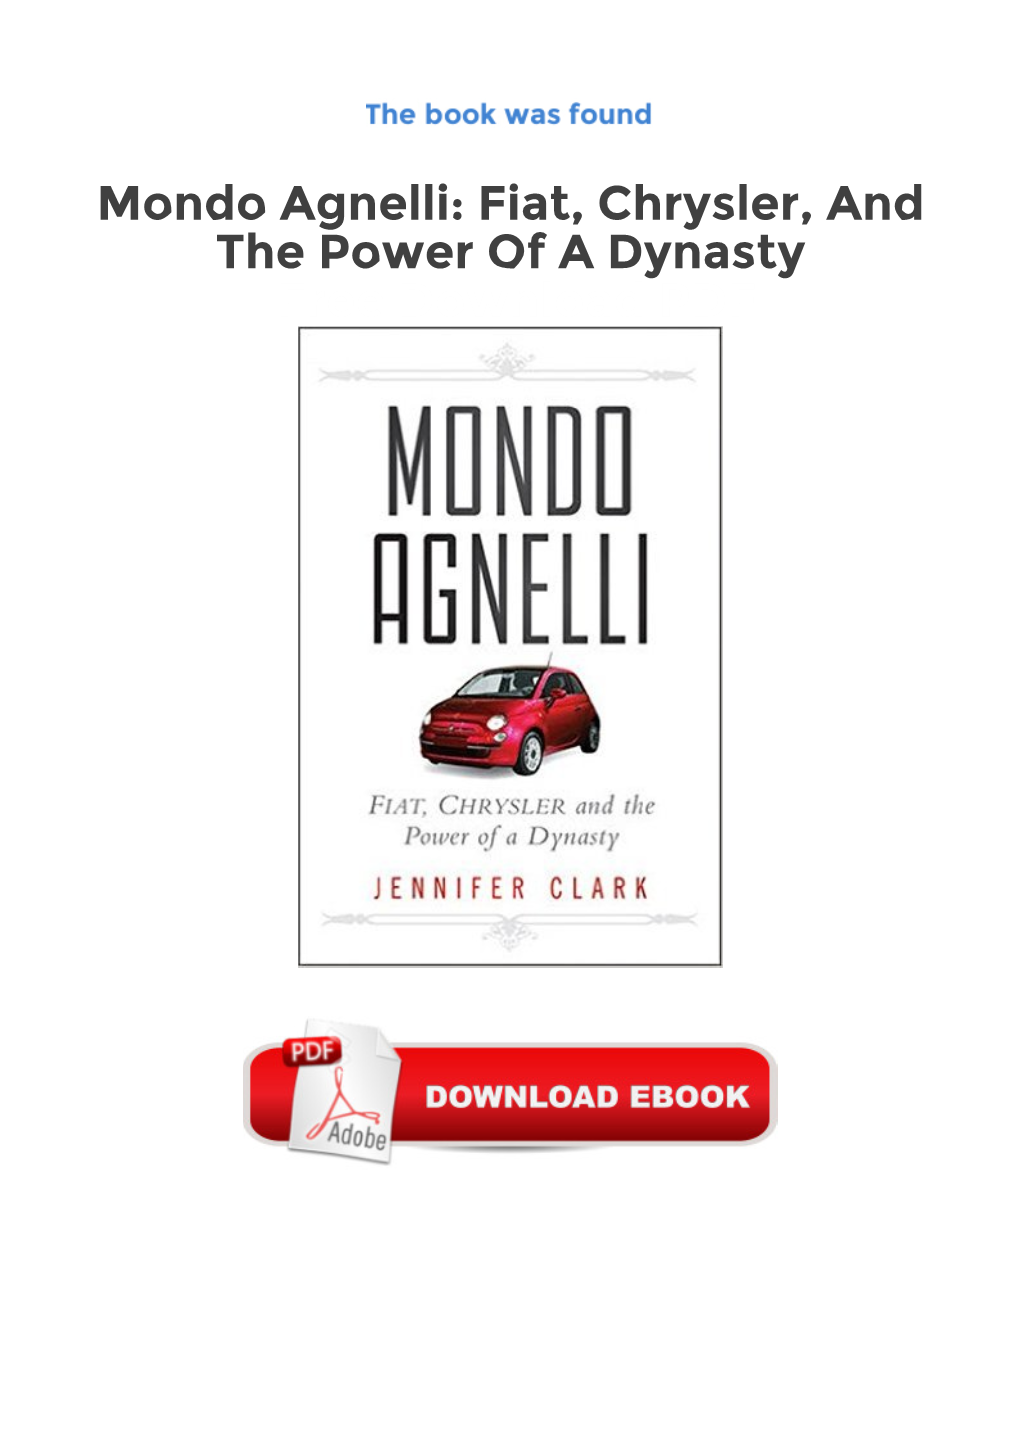 Mondo Agnelli: Fiat, Chrysler, and the Power of a Dynasty Free